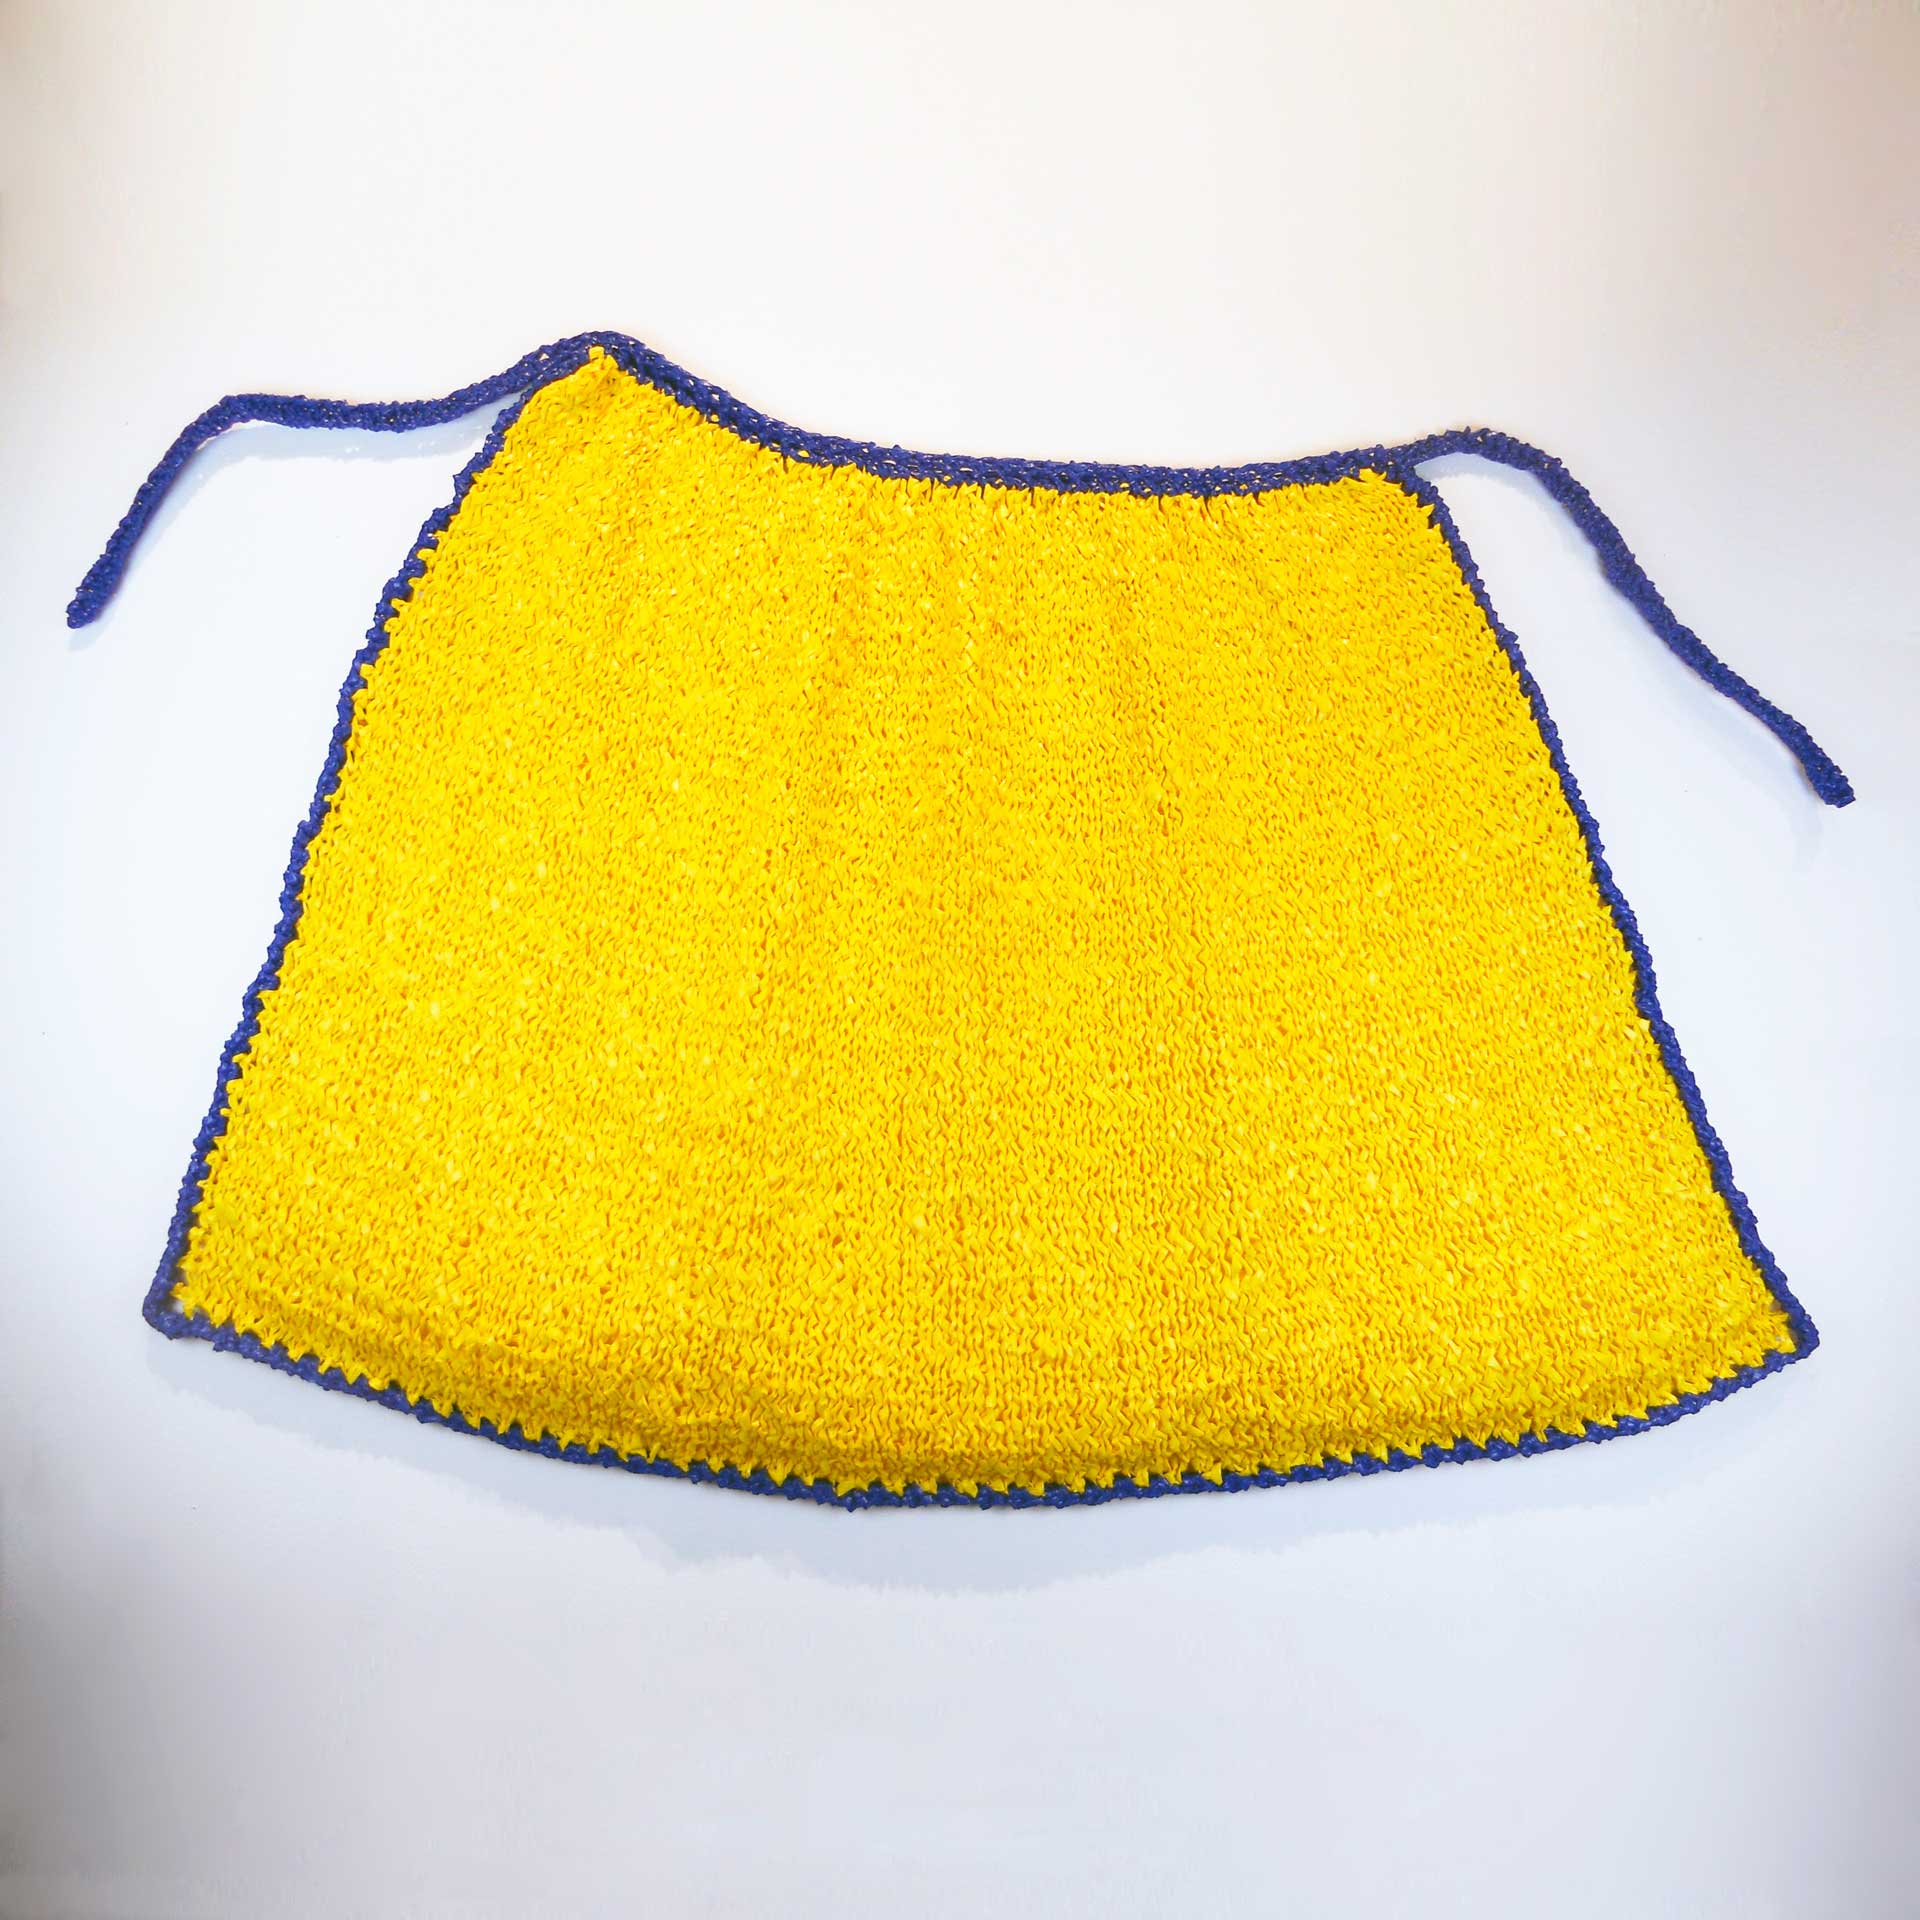 Canary Yellow Apron by Darlyn Susan Yee